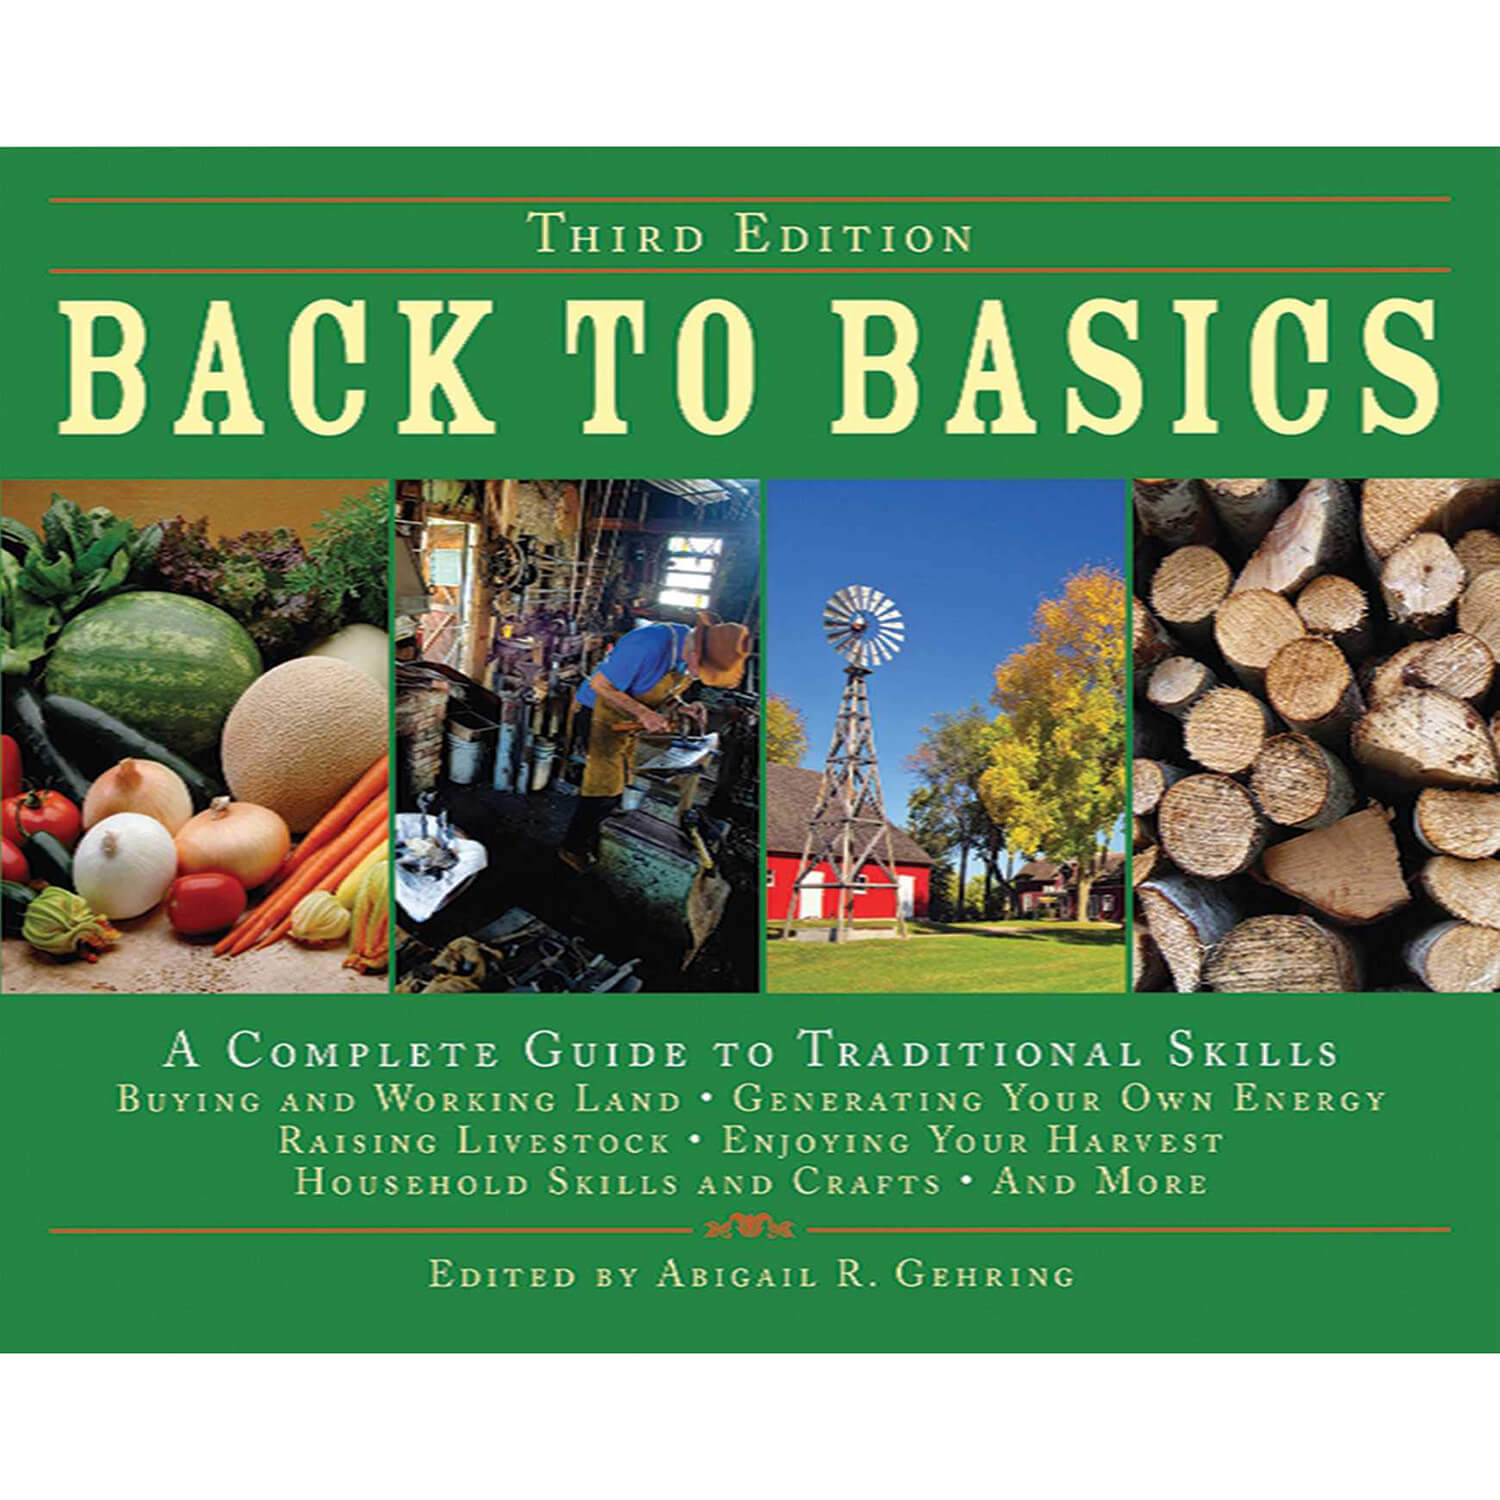 Back to Basics: A Complete Guide to Traditional Skills front cover.